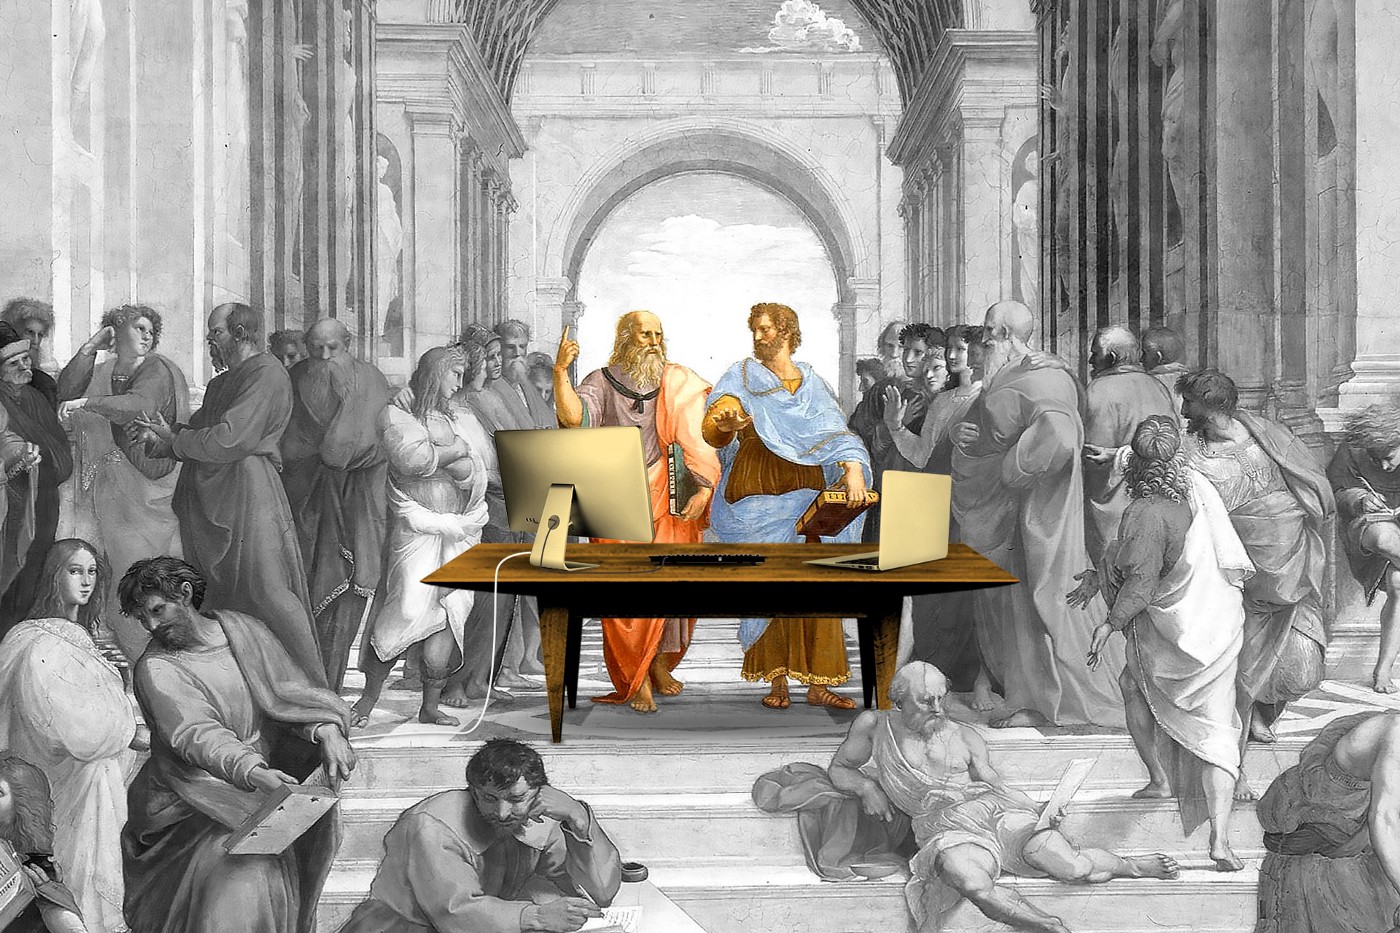 image of Aristotle an Plato from School of Athens